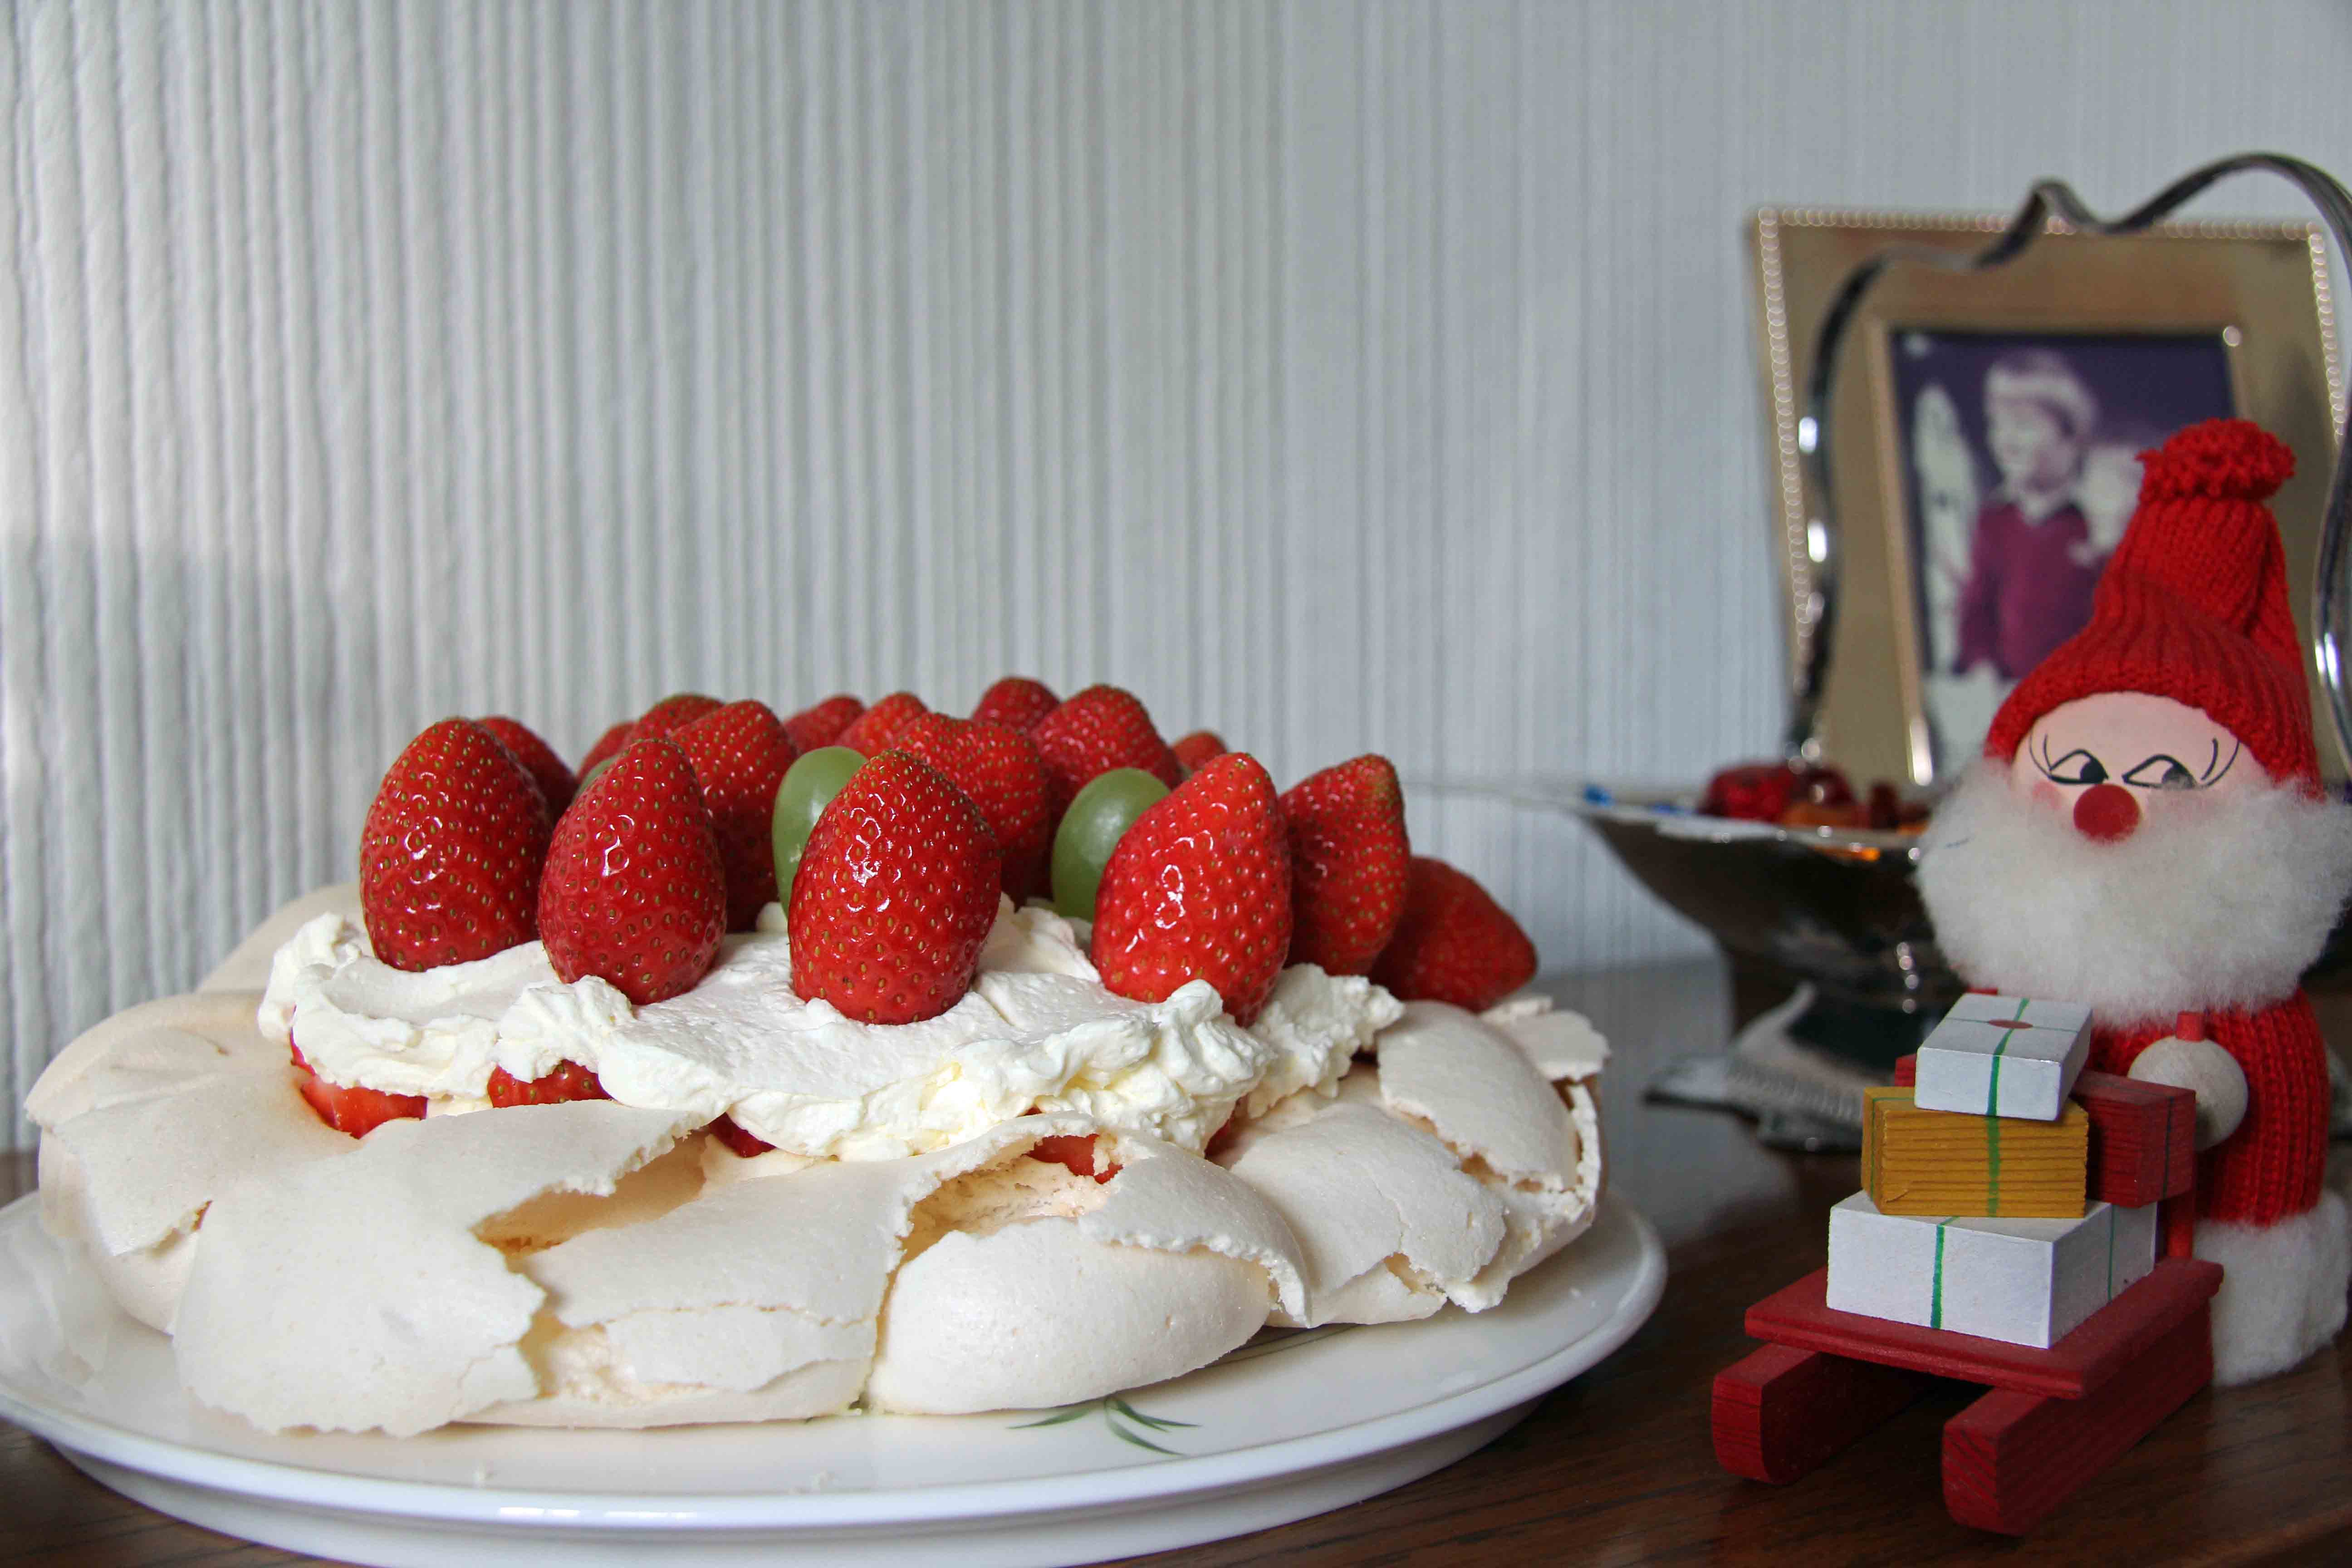 Christmas Pavlova with strawberries and grapes